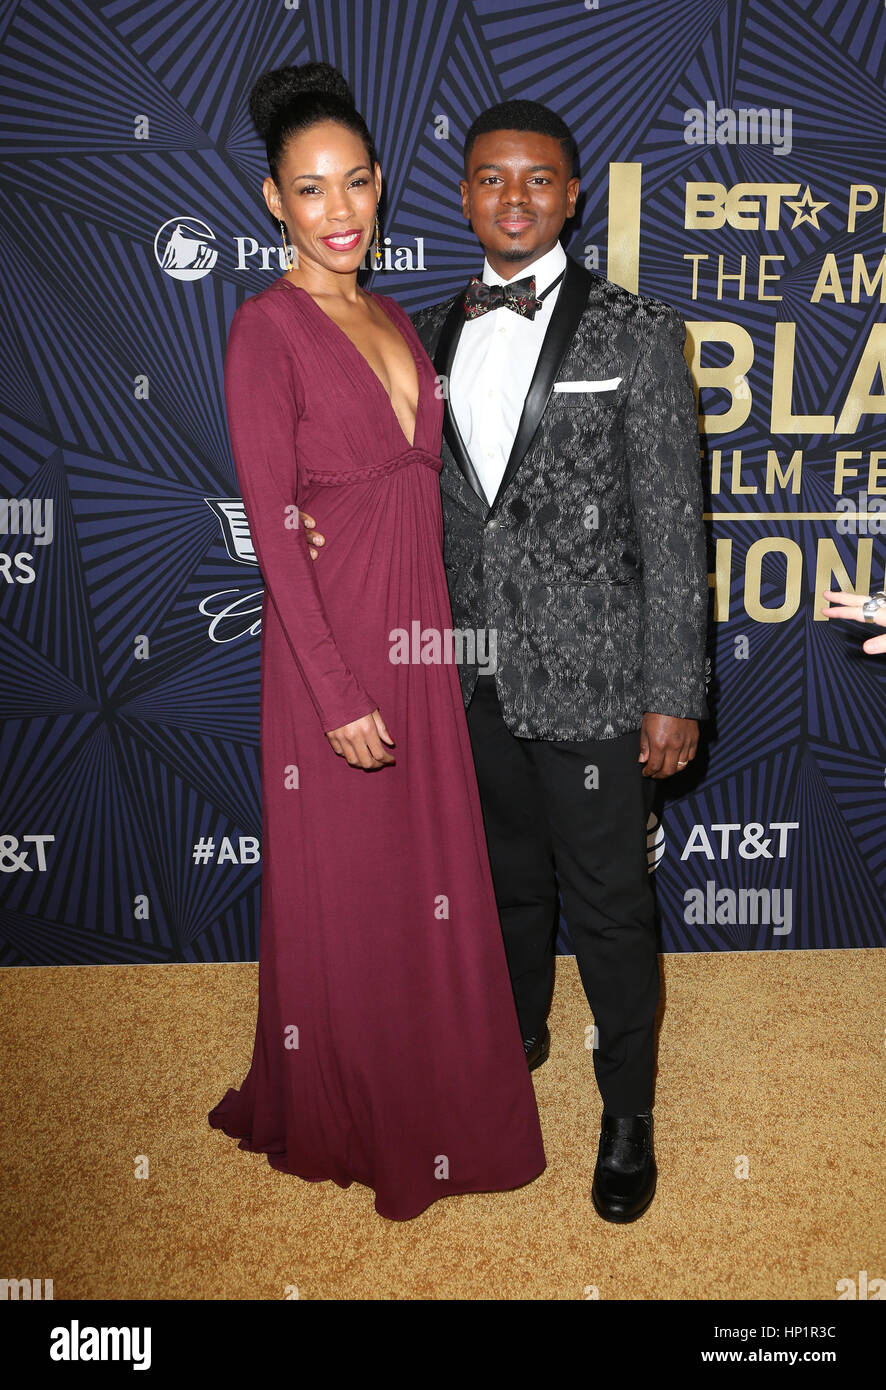 Beverly Hills, CA. 17th Feb, 2017. Jamal Mallory-McCree, At BET's 2017 American Black Film Festival Honors Awards, At The Beverly Hilton Hotel In California on February 17, 2017. Credit: Faye Sadou/Media Punch/Alamy Live News Credit: MediaPunch Inc/Alamy Live News Stock Photo